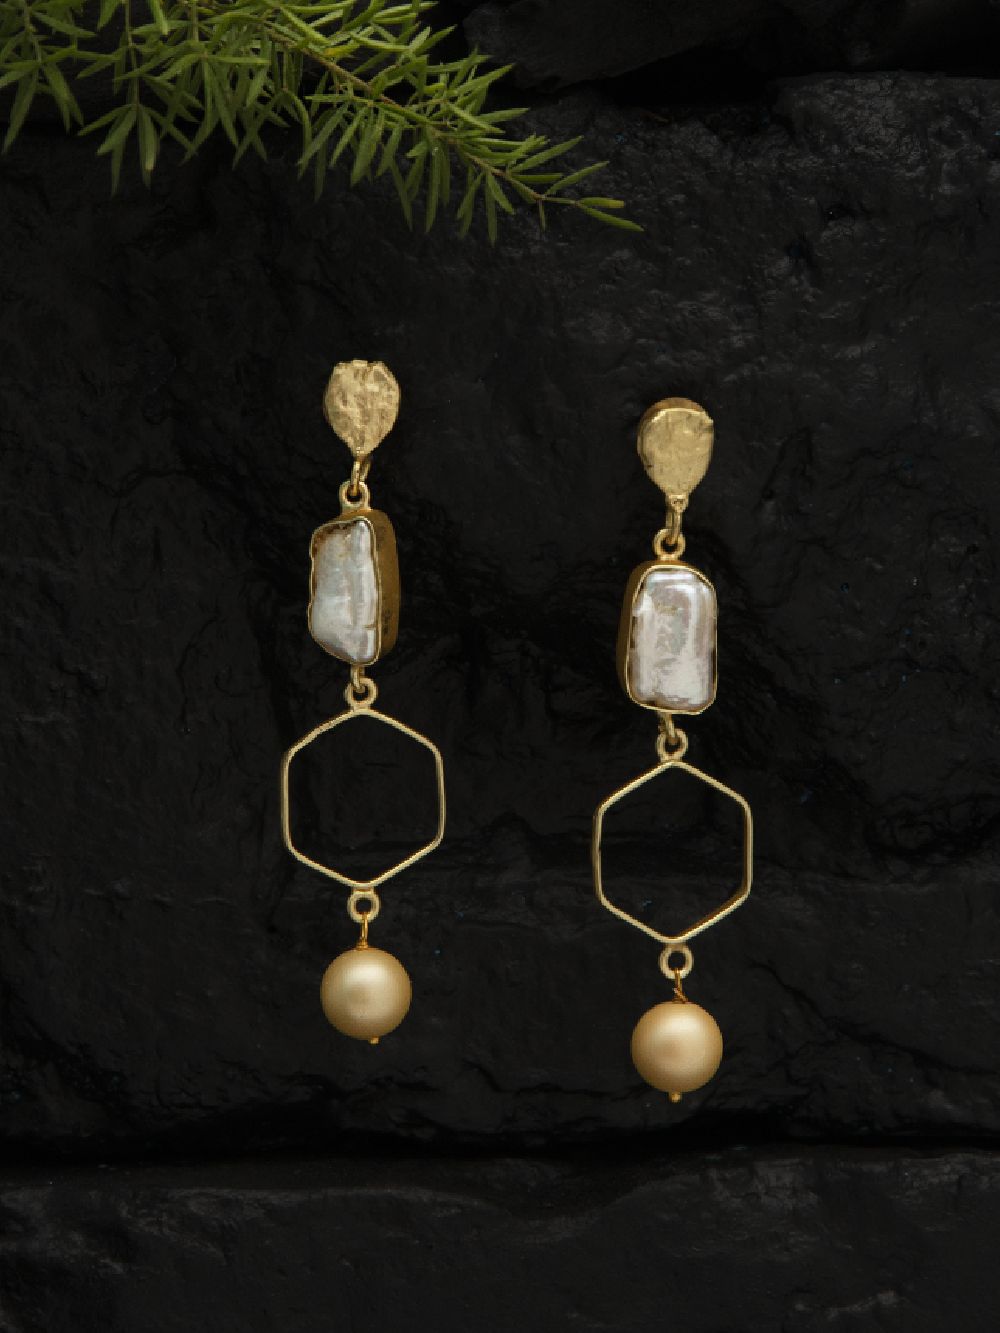  Gold Tone handcrafted Pearl Earrings